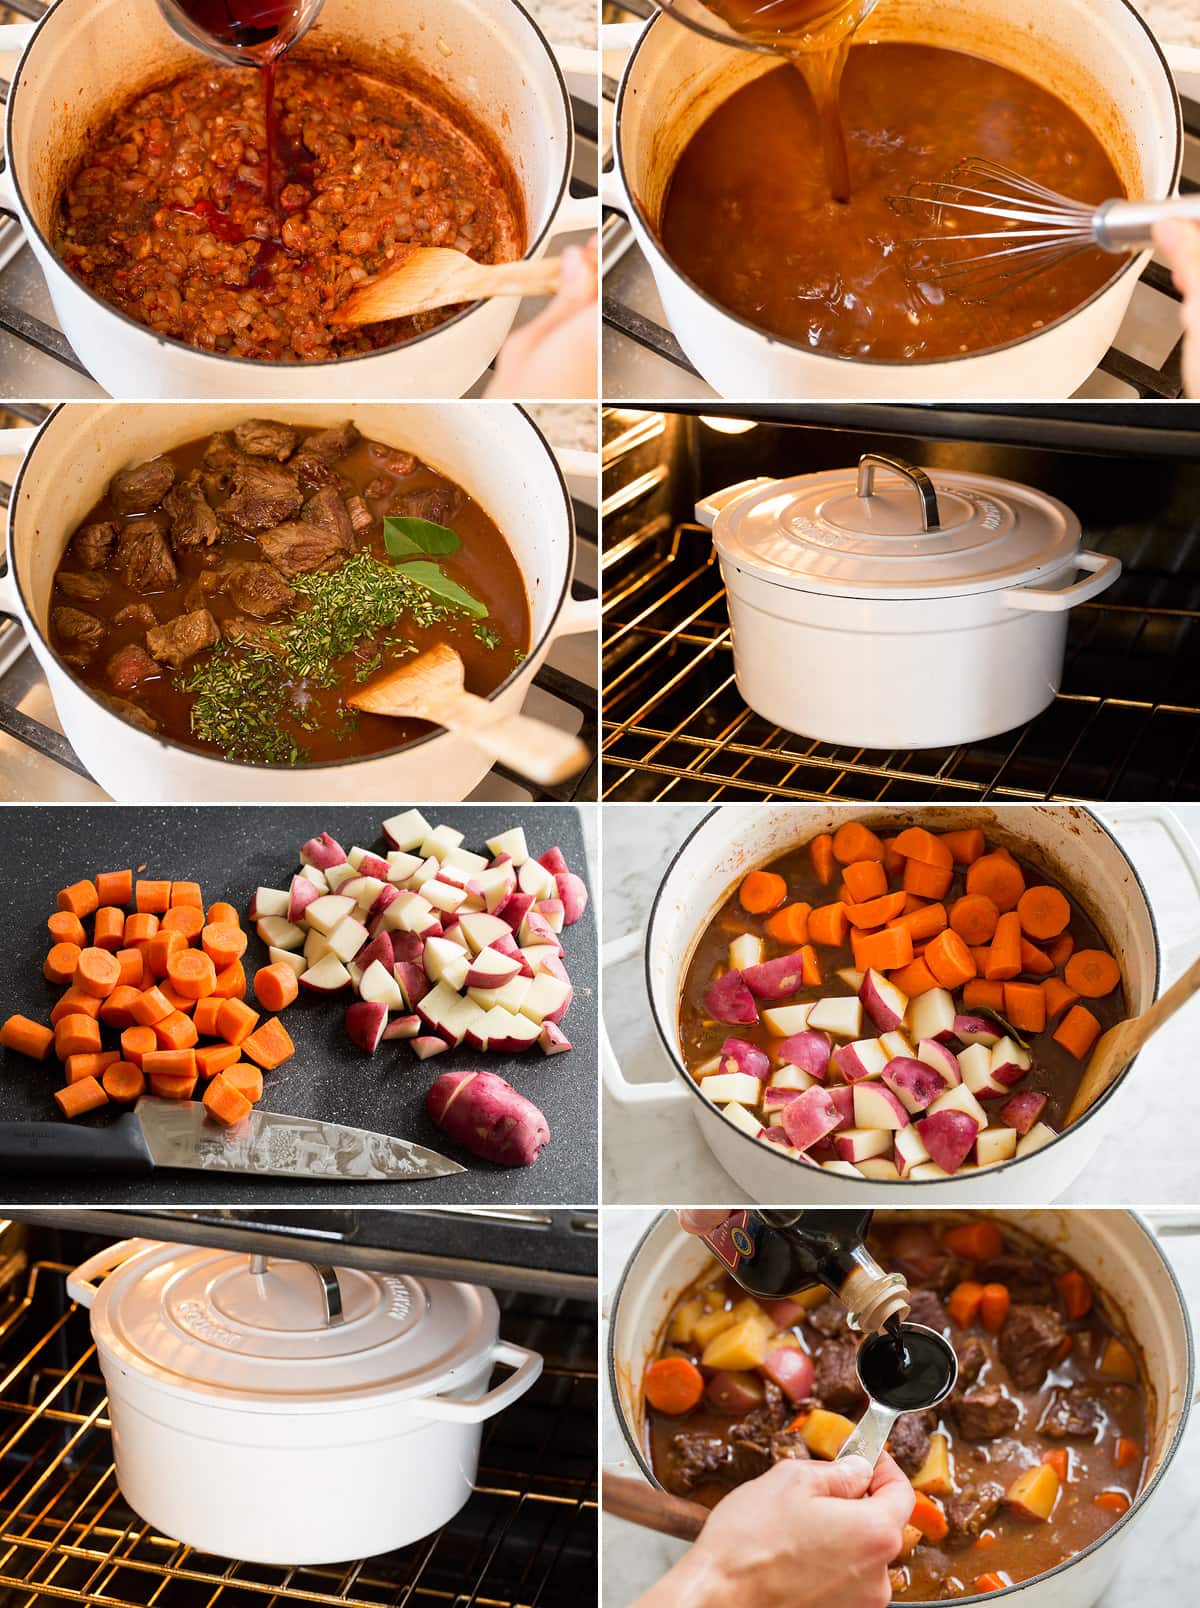 Eight images together showing how to finish beef stew with wine, broth and herbs. Then shows baking in the oven, and stirring in potatoes, carrots and balsamic vinegar.